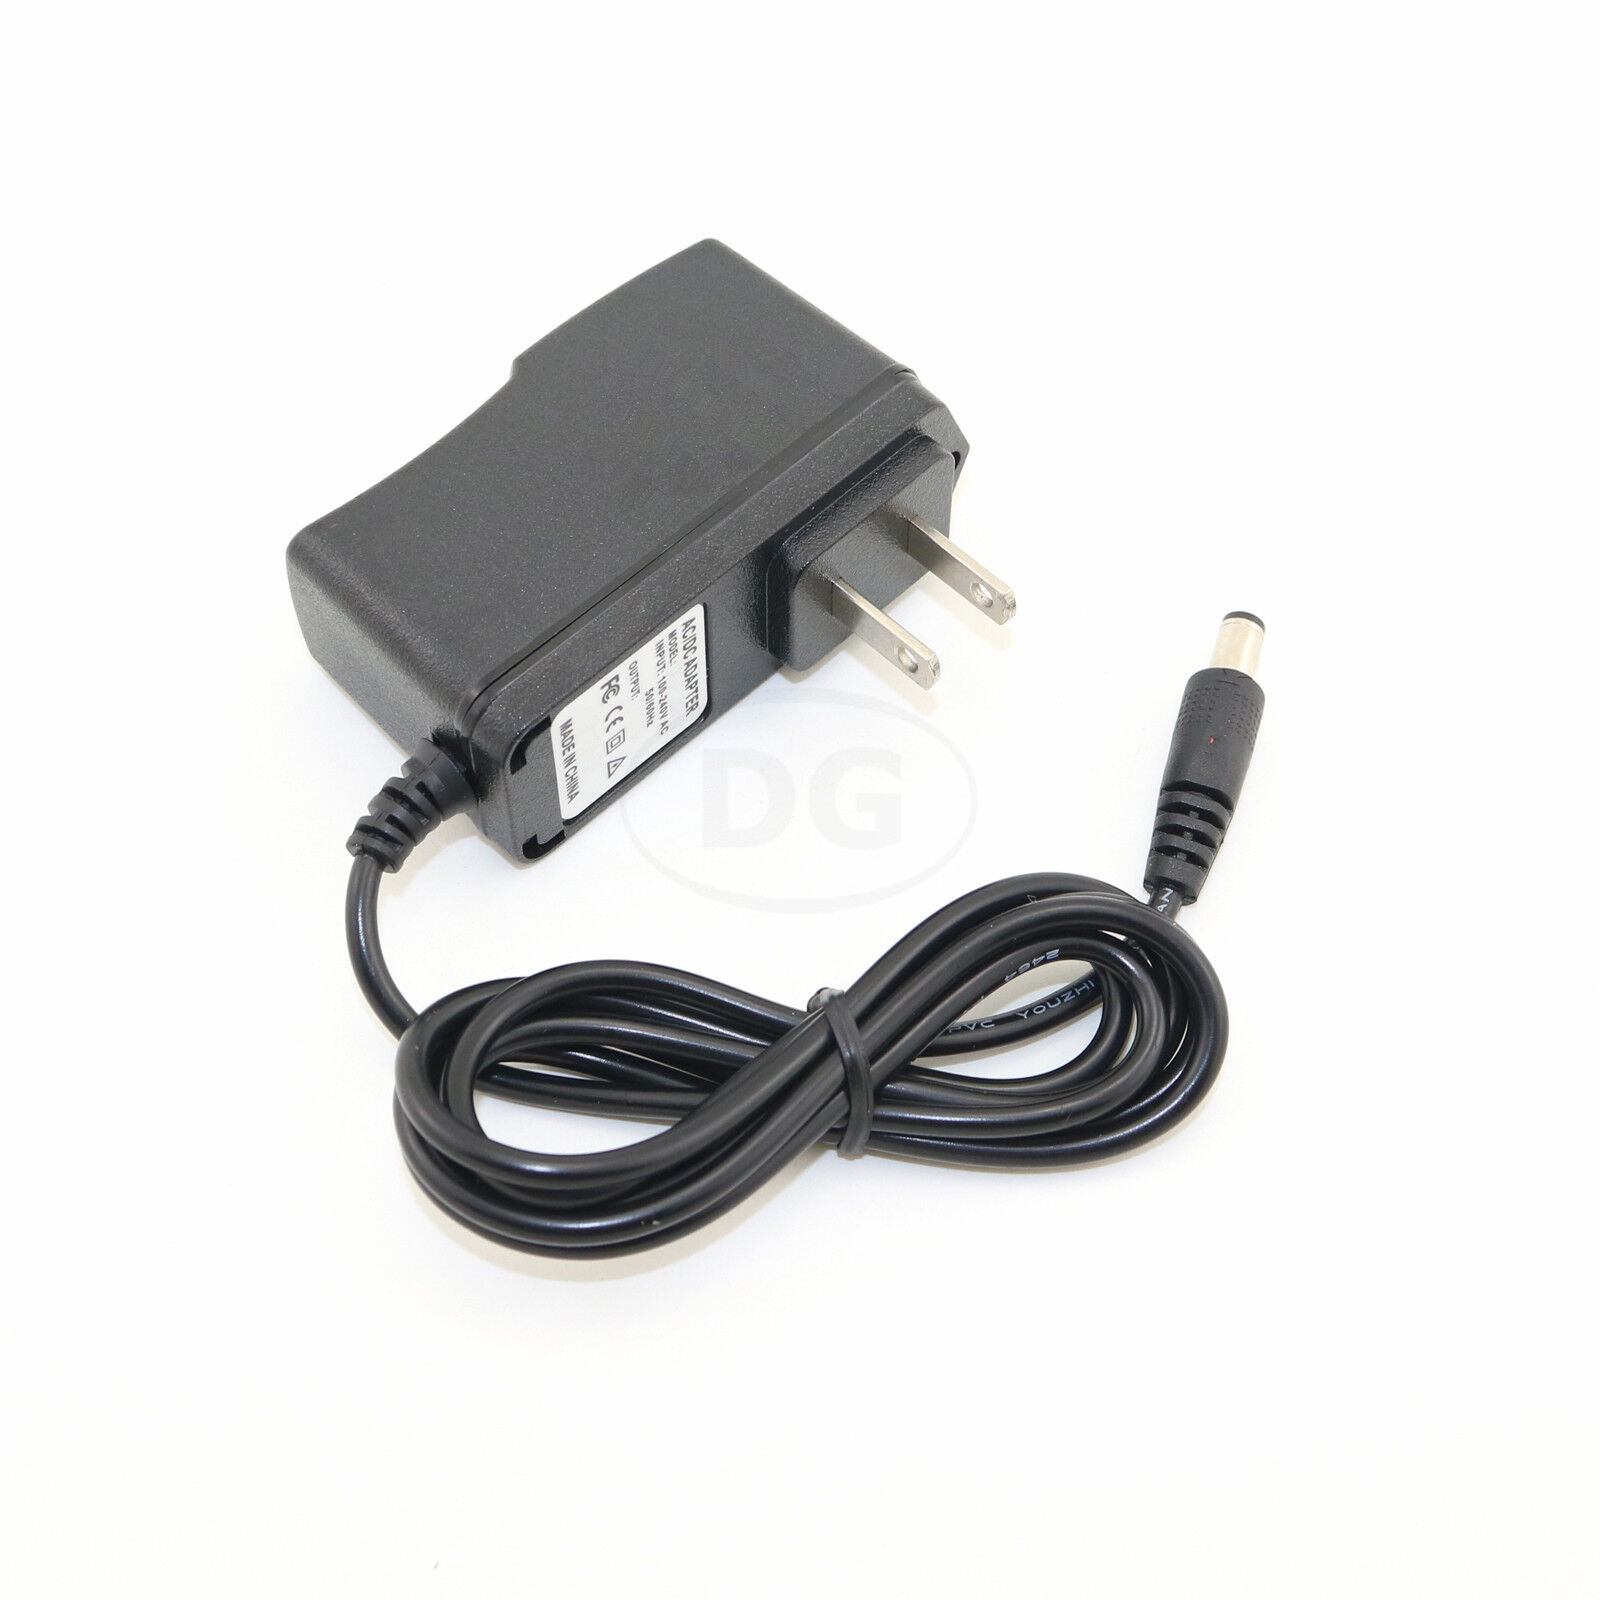 AC Adapter Wall Charger 卓抜 Power Supply For DR-670 DR-3 Boss DR-202 2022 Machines Drum